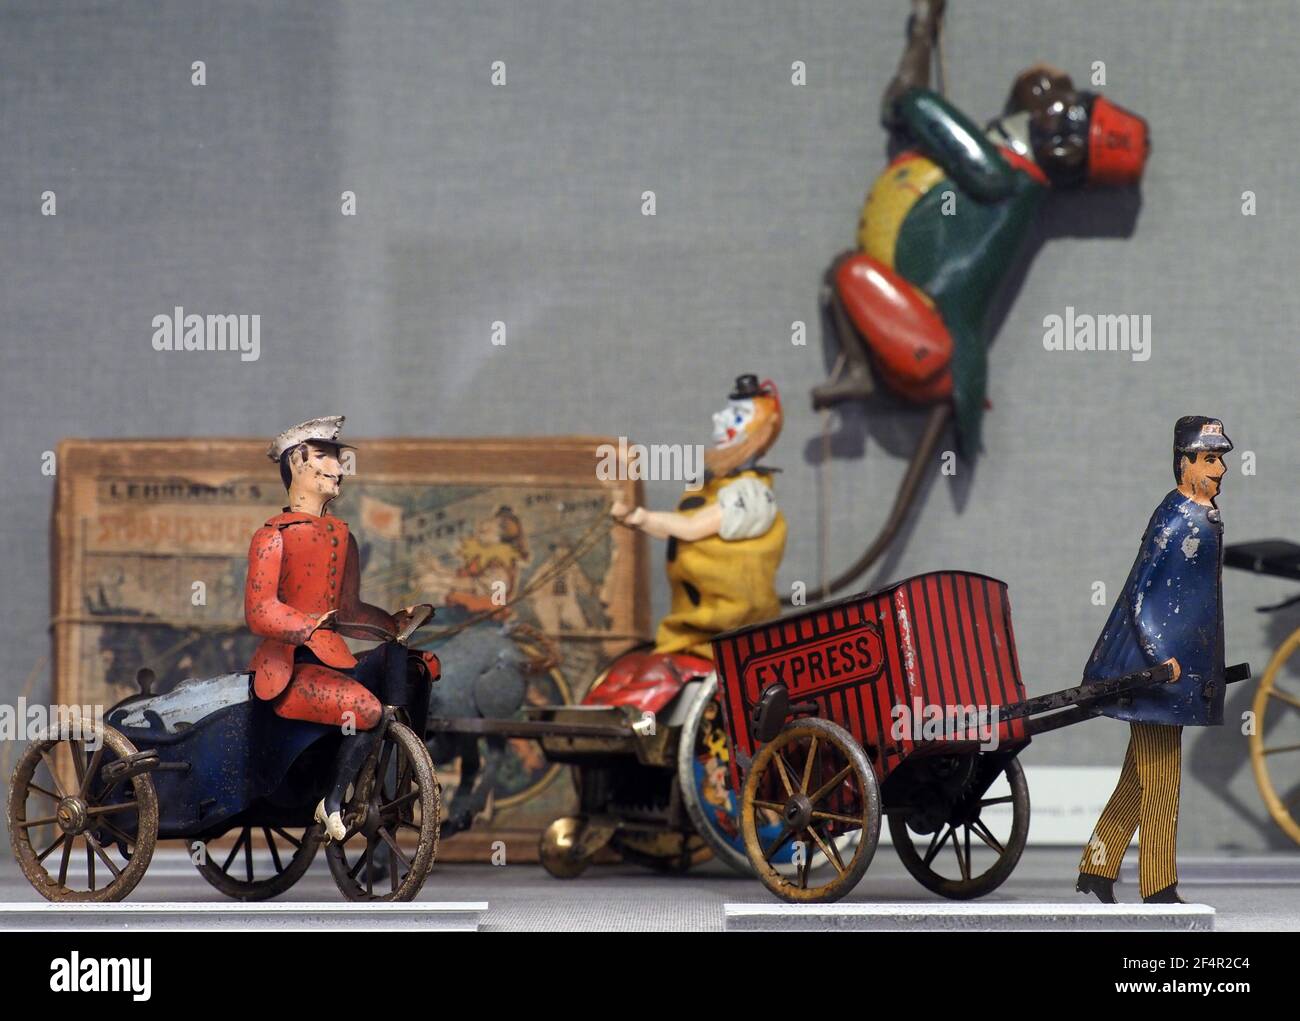 22 March 2021, Brandenburg, Fernbellin/Ot Wustrau: The 'Mars' tricycle (Ernst Paul Lehmann, Brandenburg, circa 1901) and the 'Express' delivery messenger (Ernst Paul Lehmann, Brandenburg, circa 1928) are set up in a glass display case in the special exhibition '(K)ein Kinderspiel - Spielzeug als Spiegel der Industrialisierung' ((No Child's Play - Toys as a Mirror of Industrialization) in the Brandenburg-Prussia Museum. The exhibition uses many small things to show how mechanisation and population growth had an effect right into the children's room. The toy exhibition is initially designed unti Stock Photo